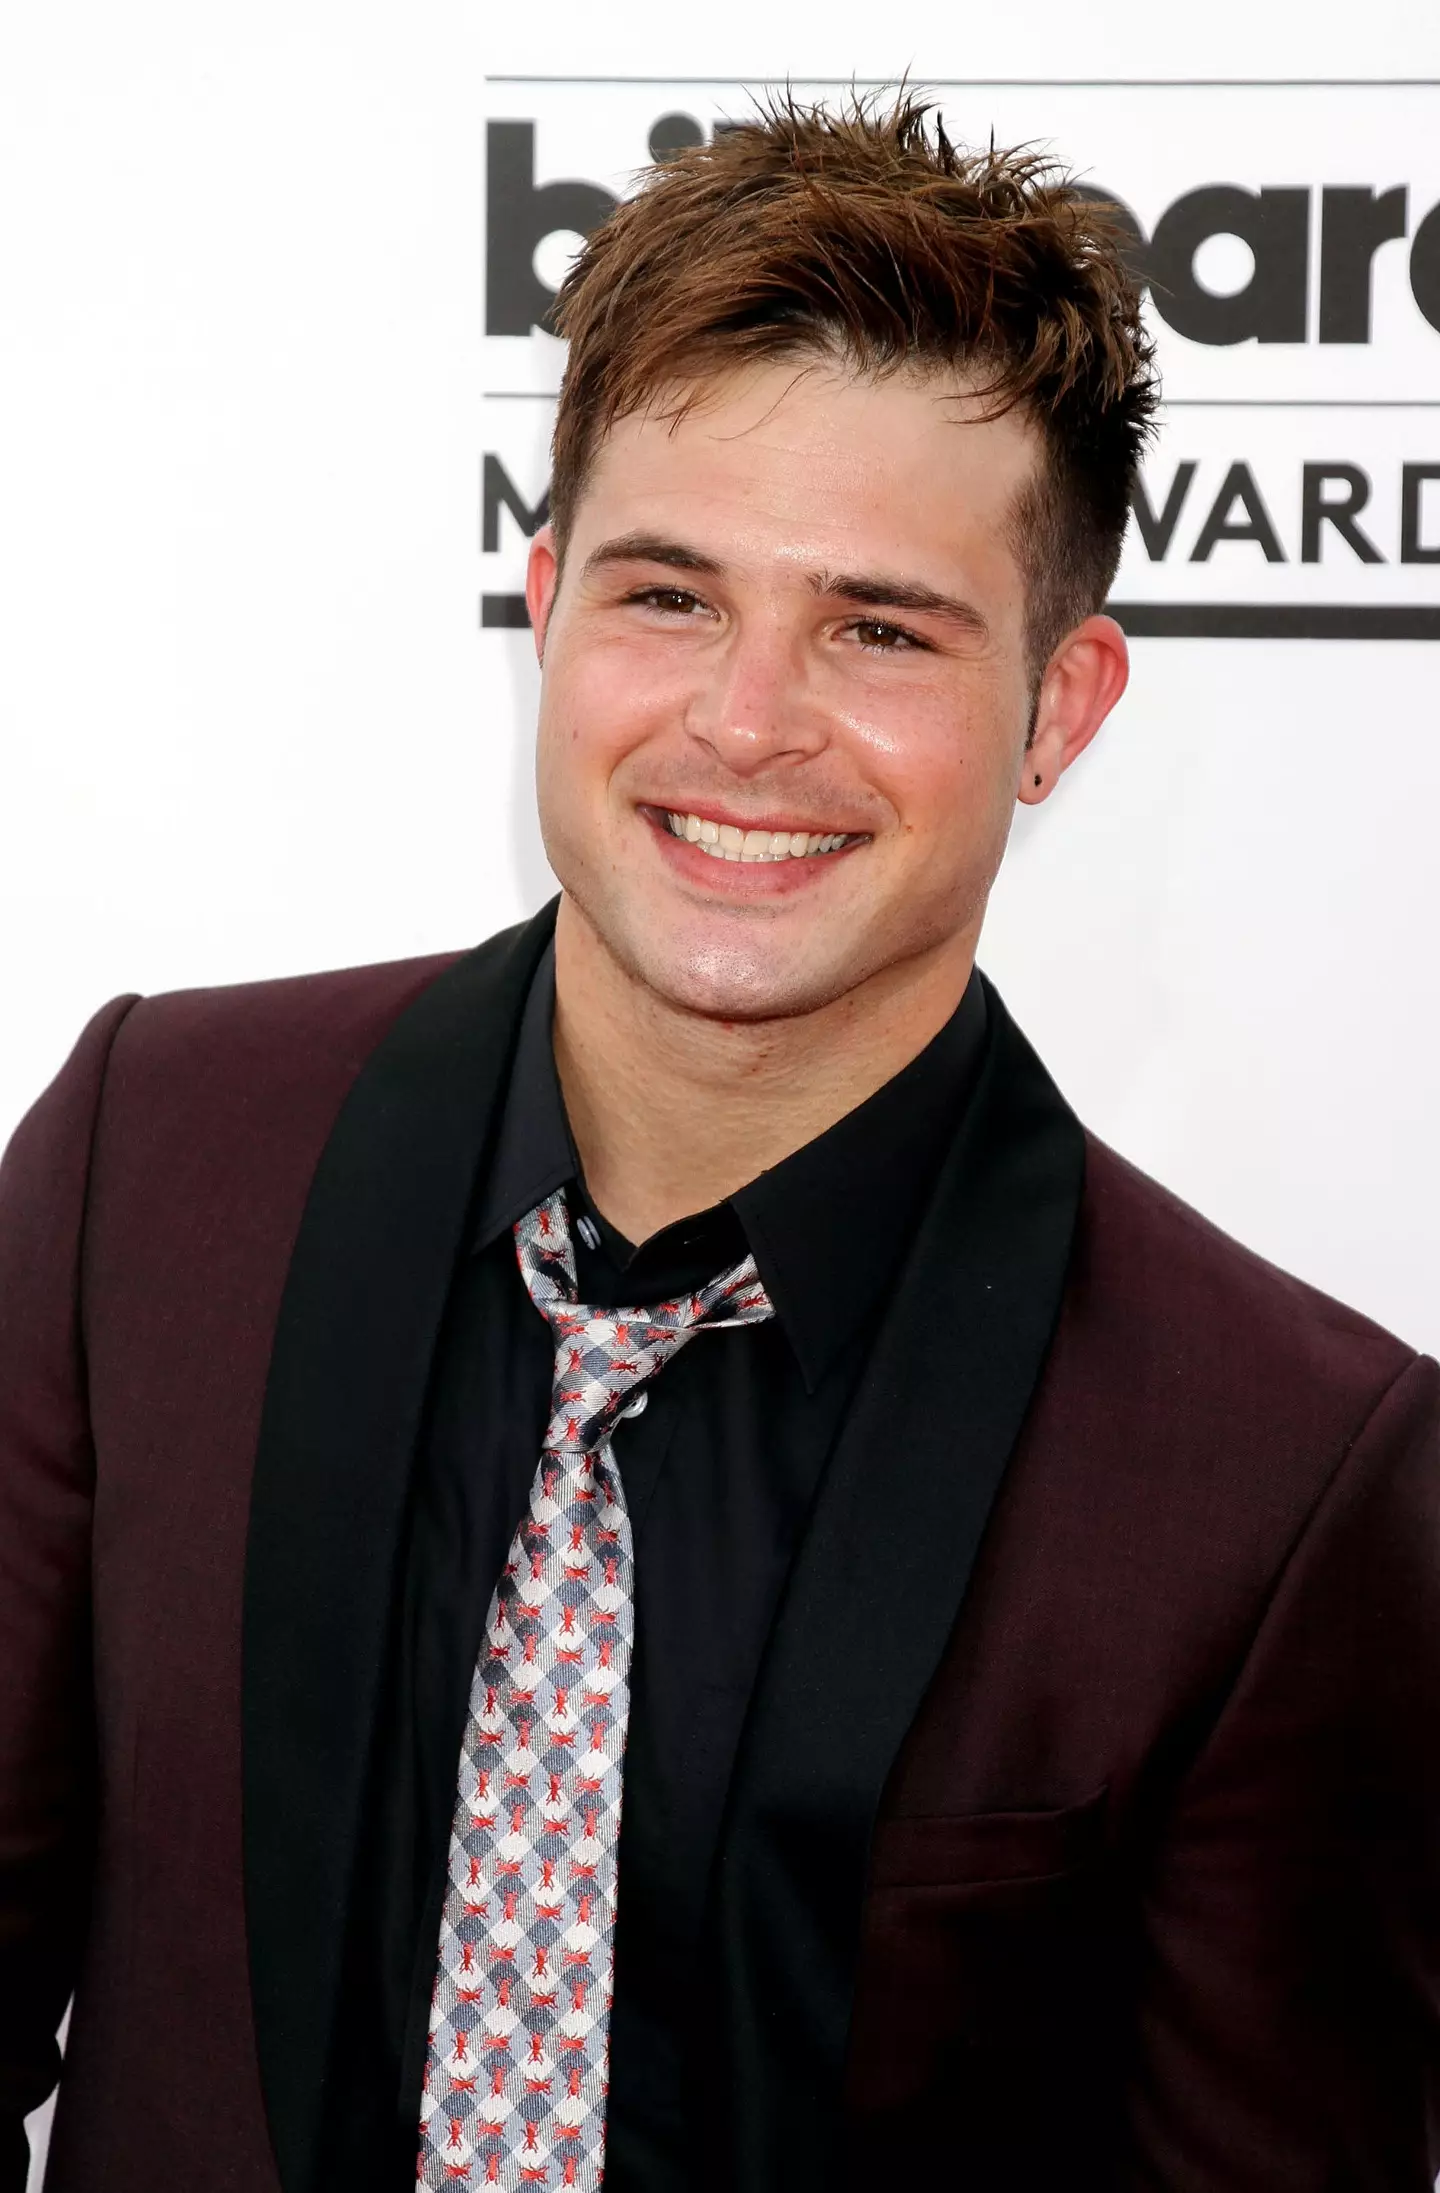 Actor Cody Longo has passed away at the age of 34.